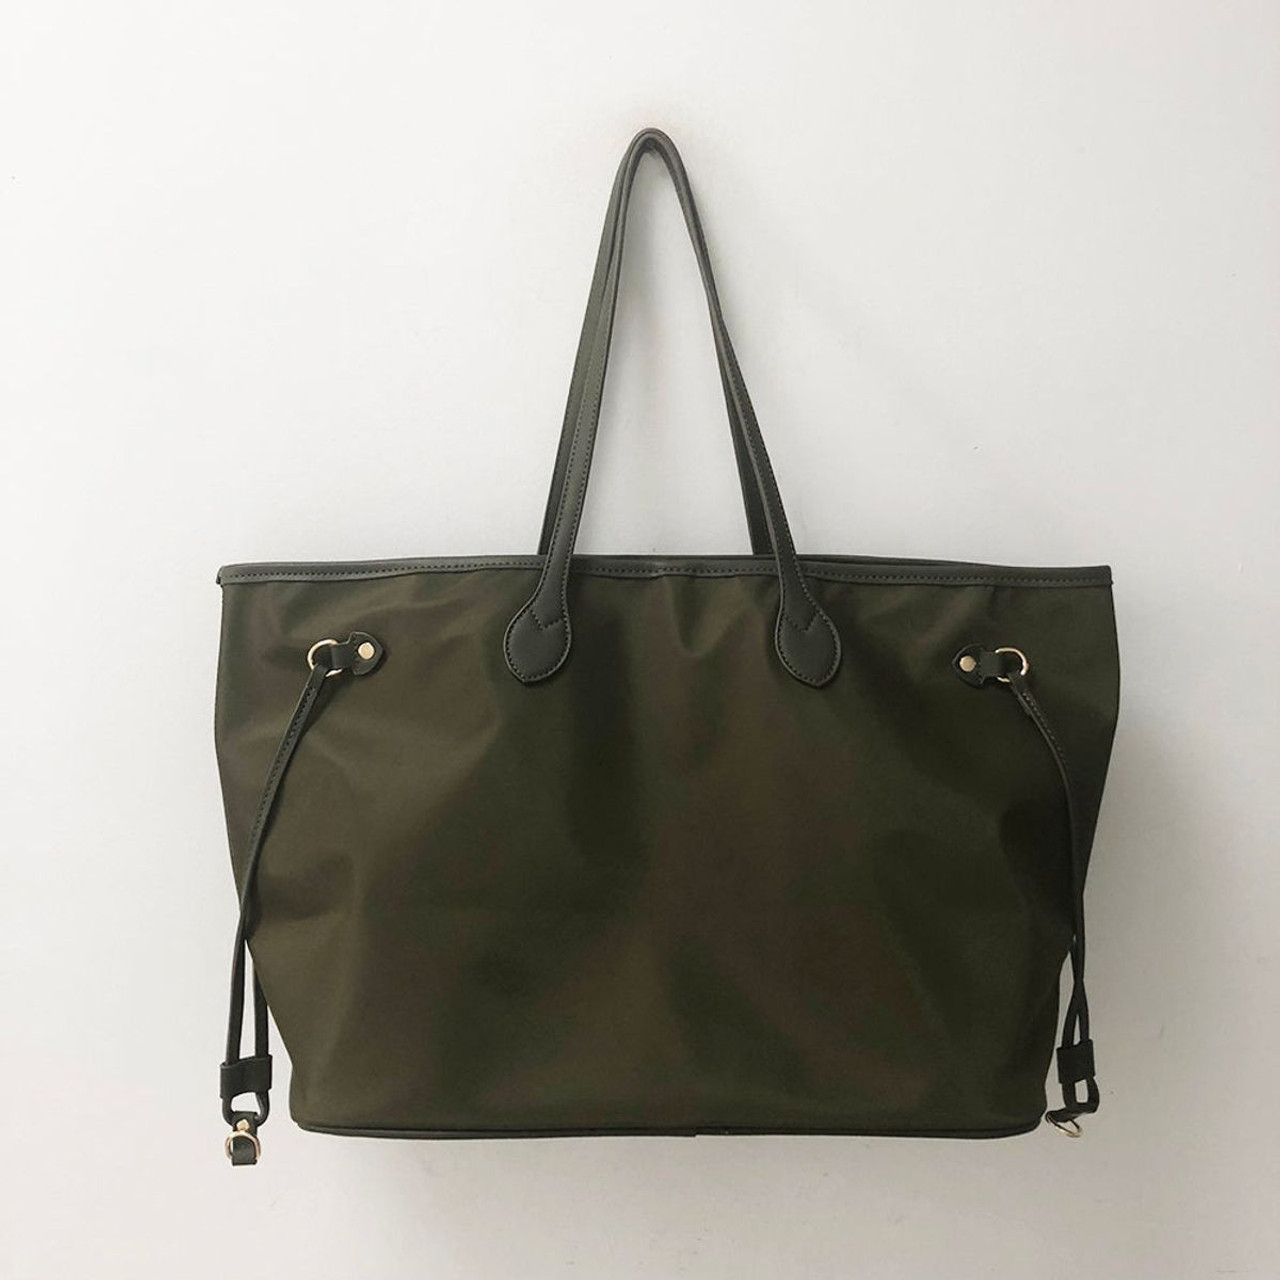 Threaded Pear Callie Tote product image